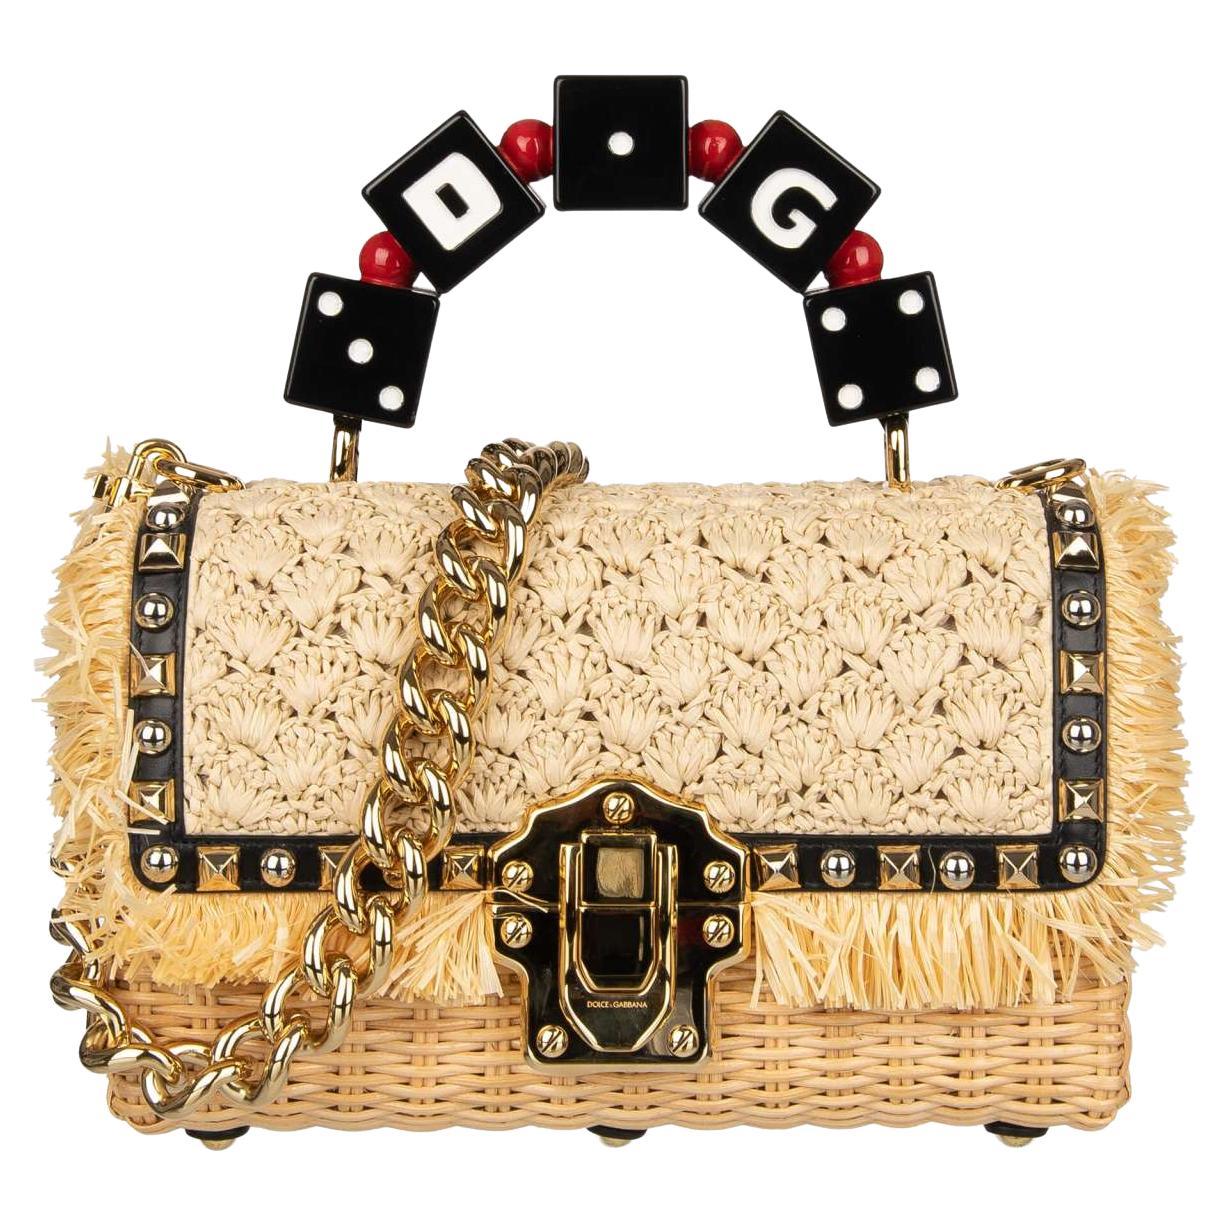 D&G Raffia Straw Shoulder Bag LUCIA with Studs and Dices Handle Beige Black For Sale